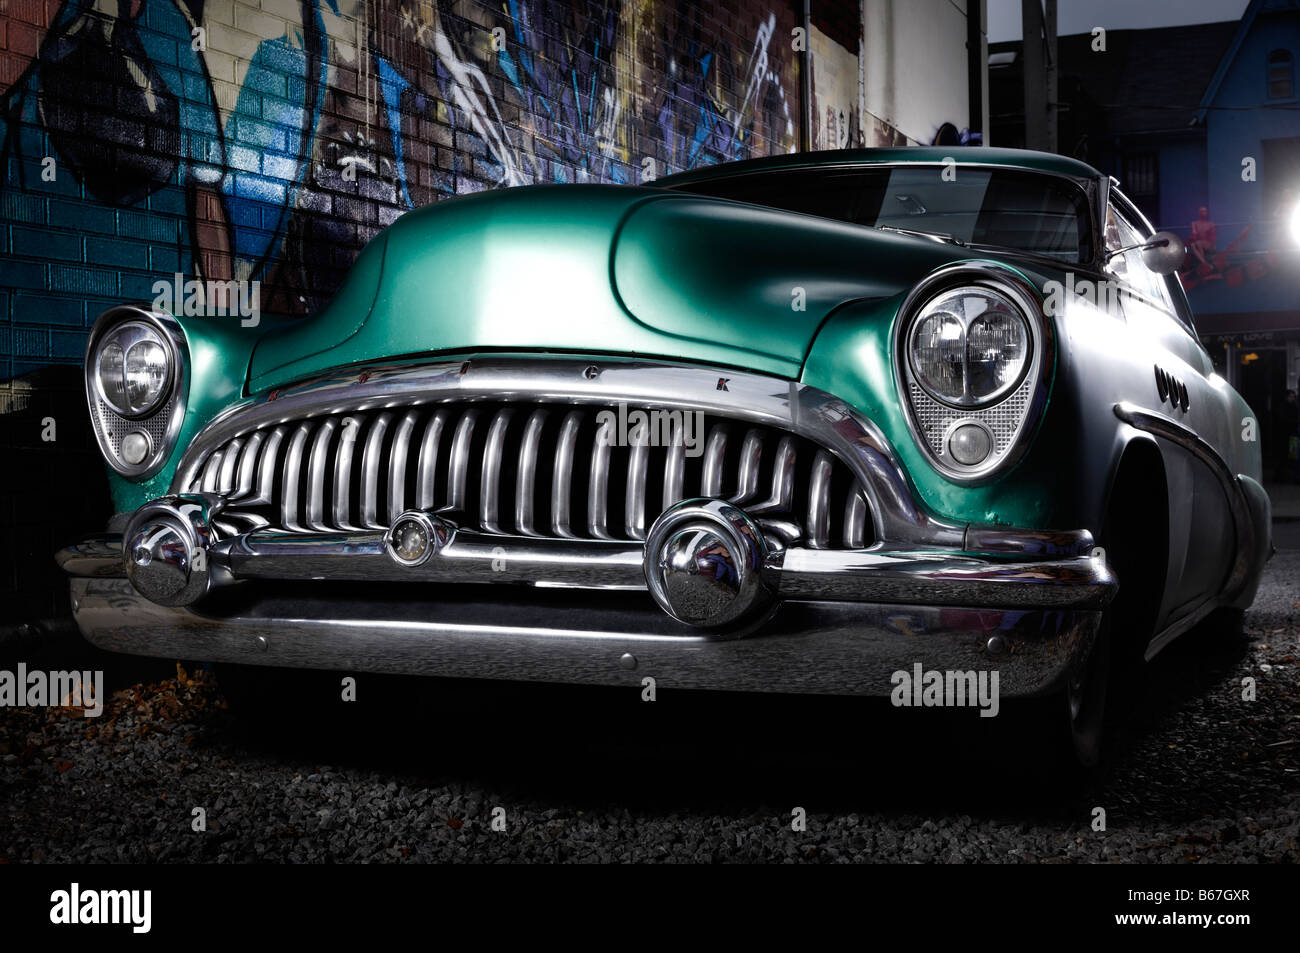 License available at MaximImages.com - 1953 Buick Roadmaster green vintage retro car in an alley Stock Photo